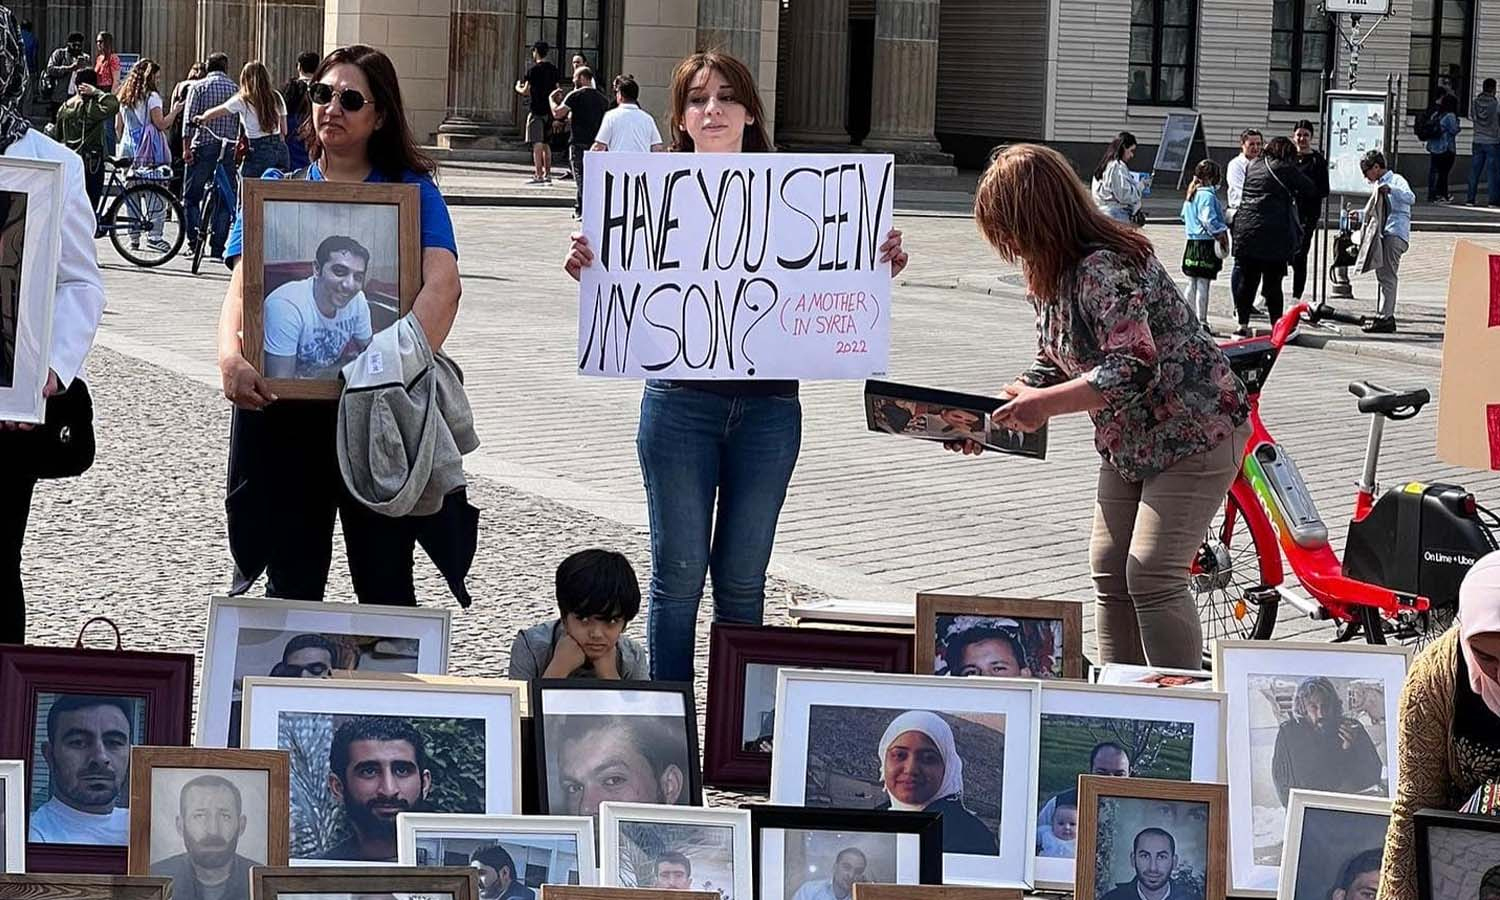 A gathering in Berlin in solidarity with the Syrian detainees’ families, coinciding with Bashar al-Assad’s general amnesty - 8 May 2022 (Families For Freedom)